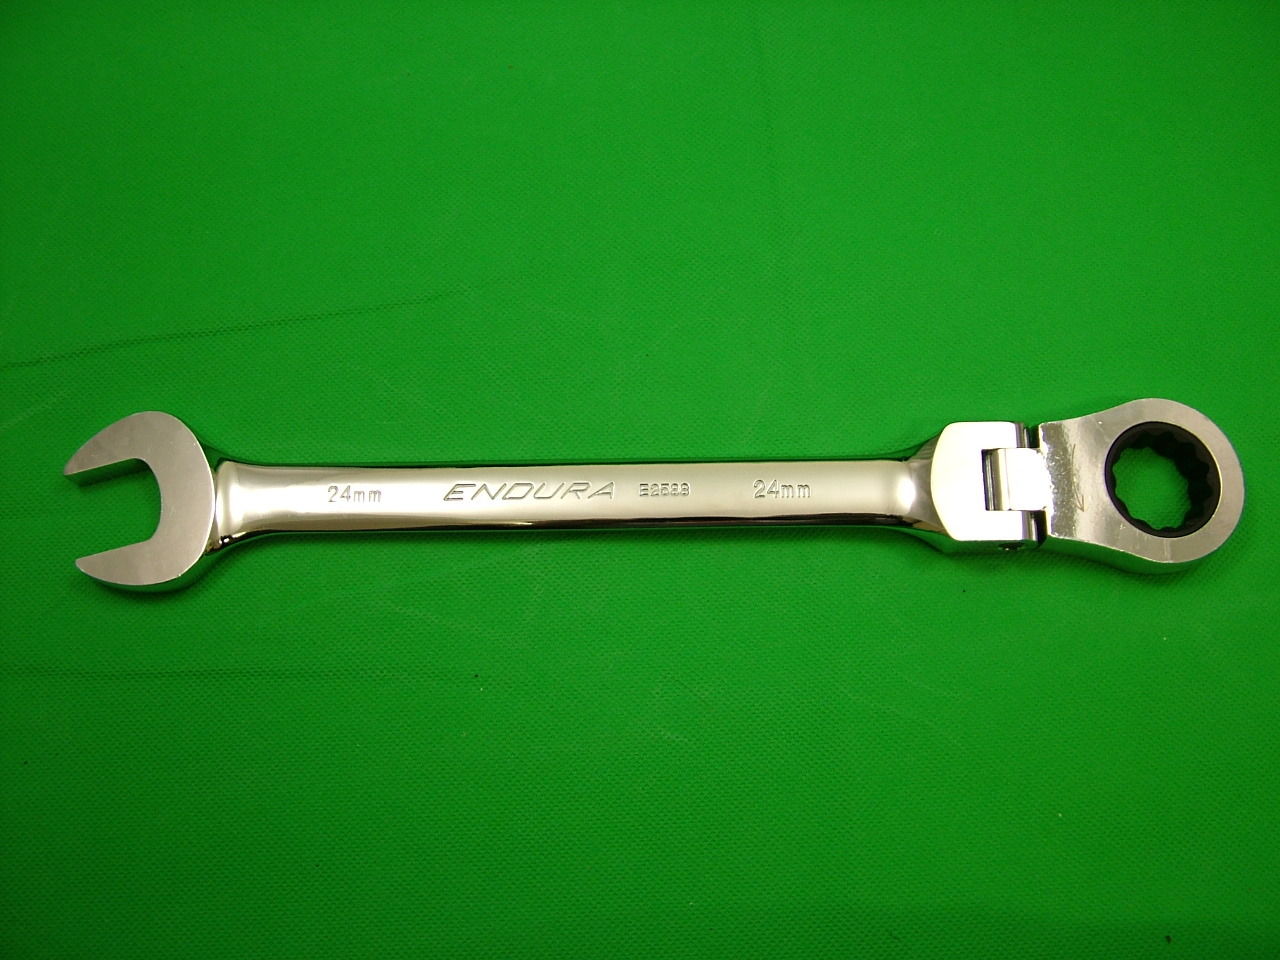 Flexible Ratchet Combination Spanner 24mm - Click Image to Close